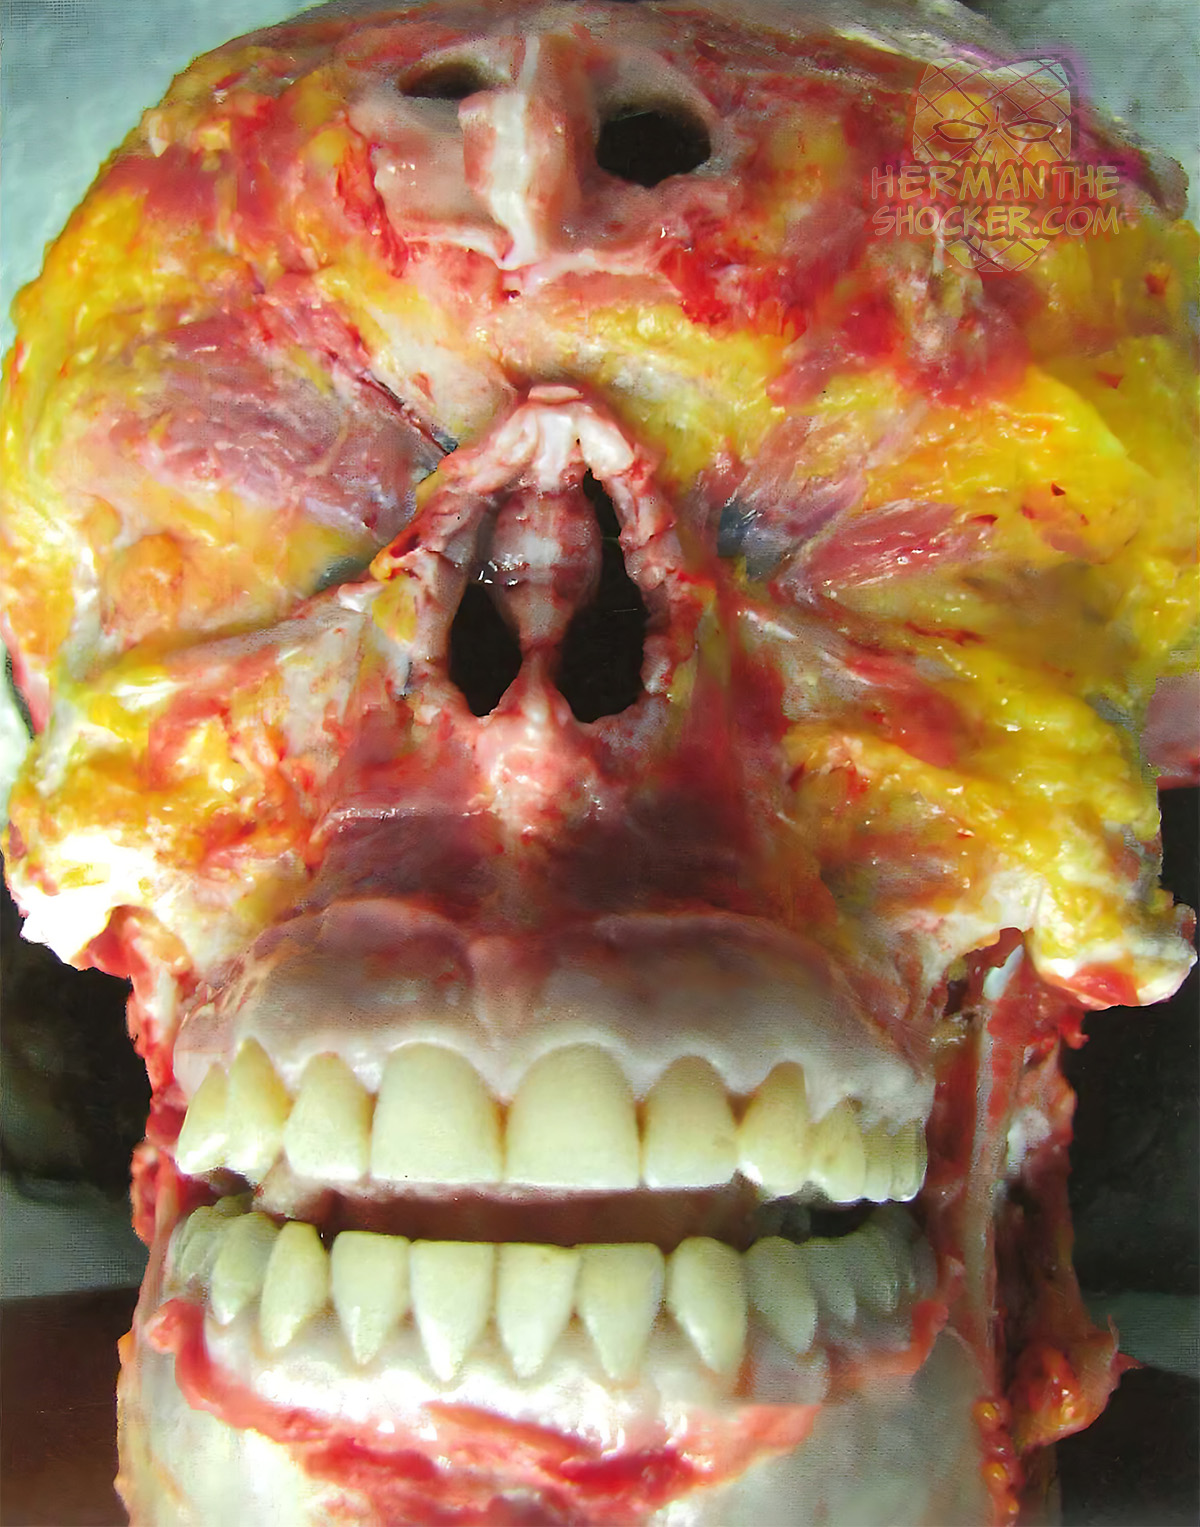 Facial dissection